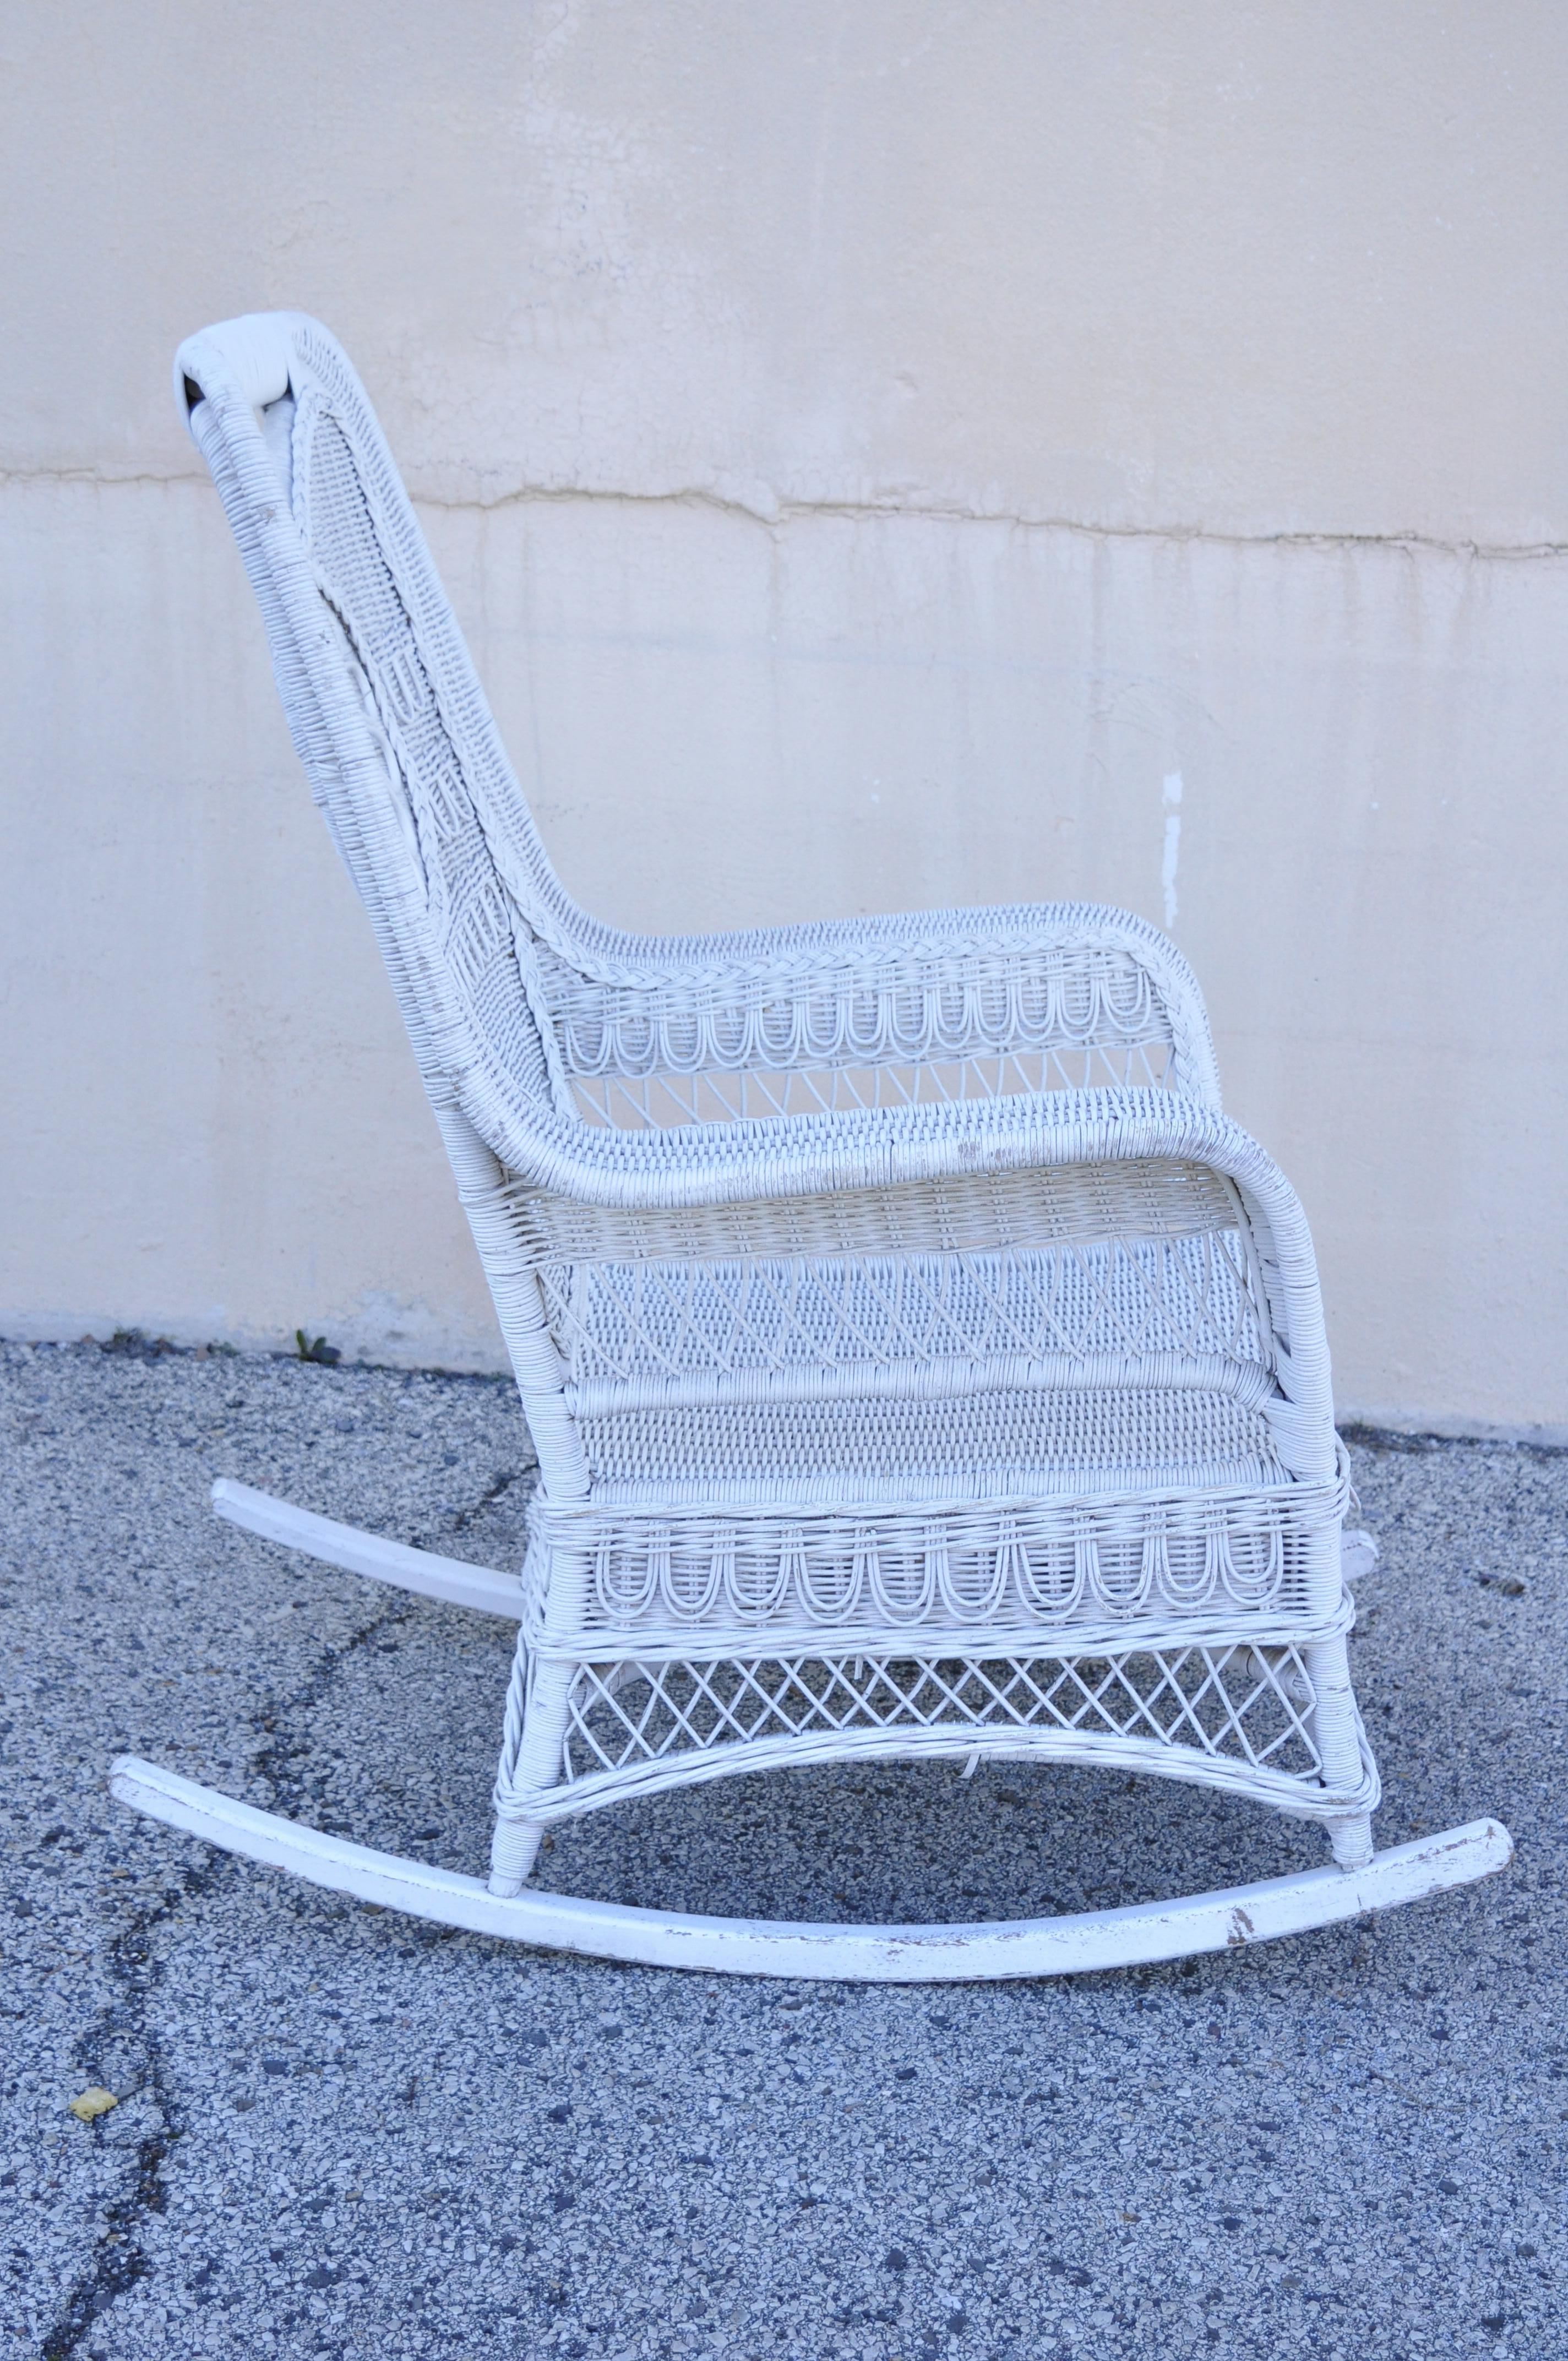 Vintage Oversize White Victorian Style Wicker Rattan Rocking Chair Lounge Chair 1